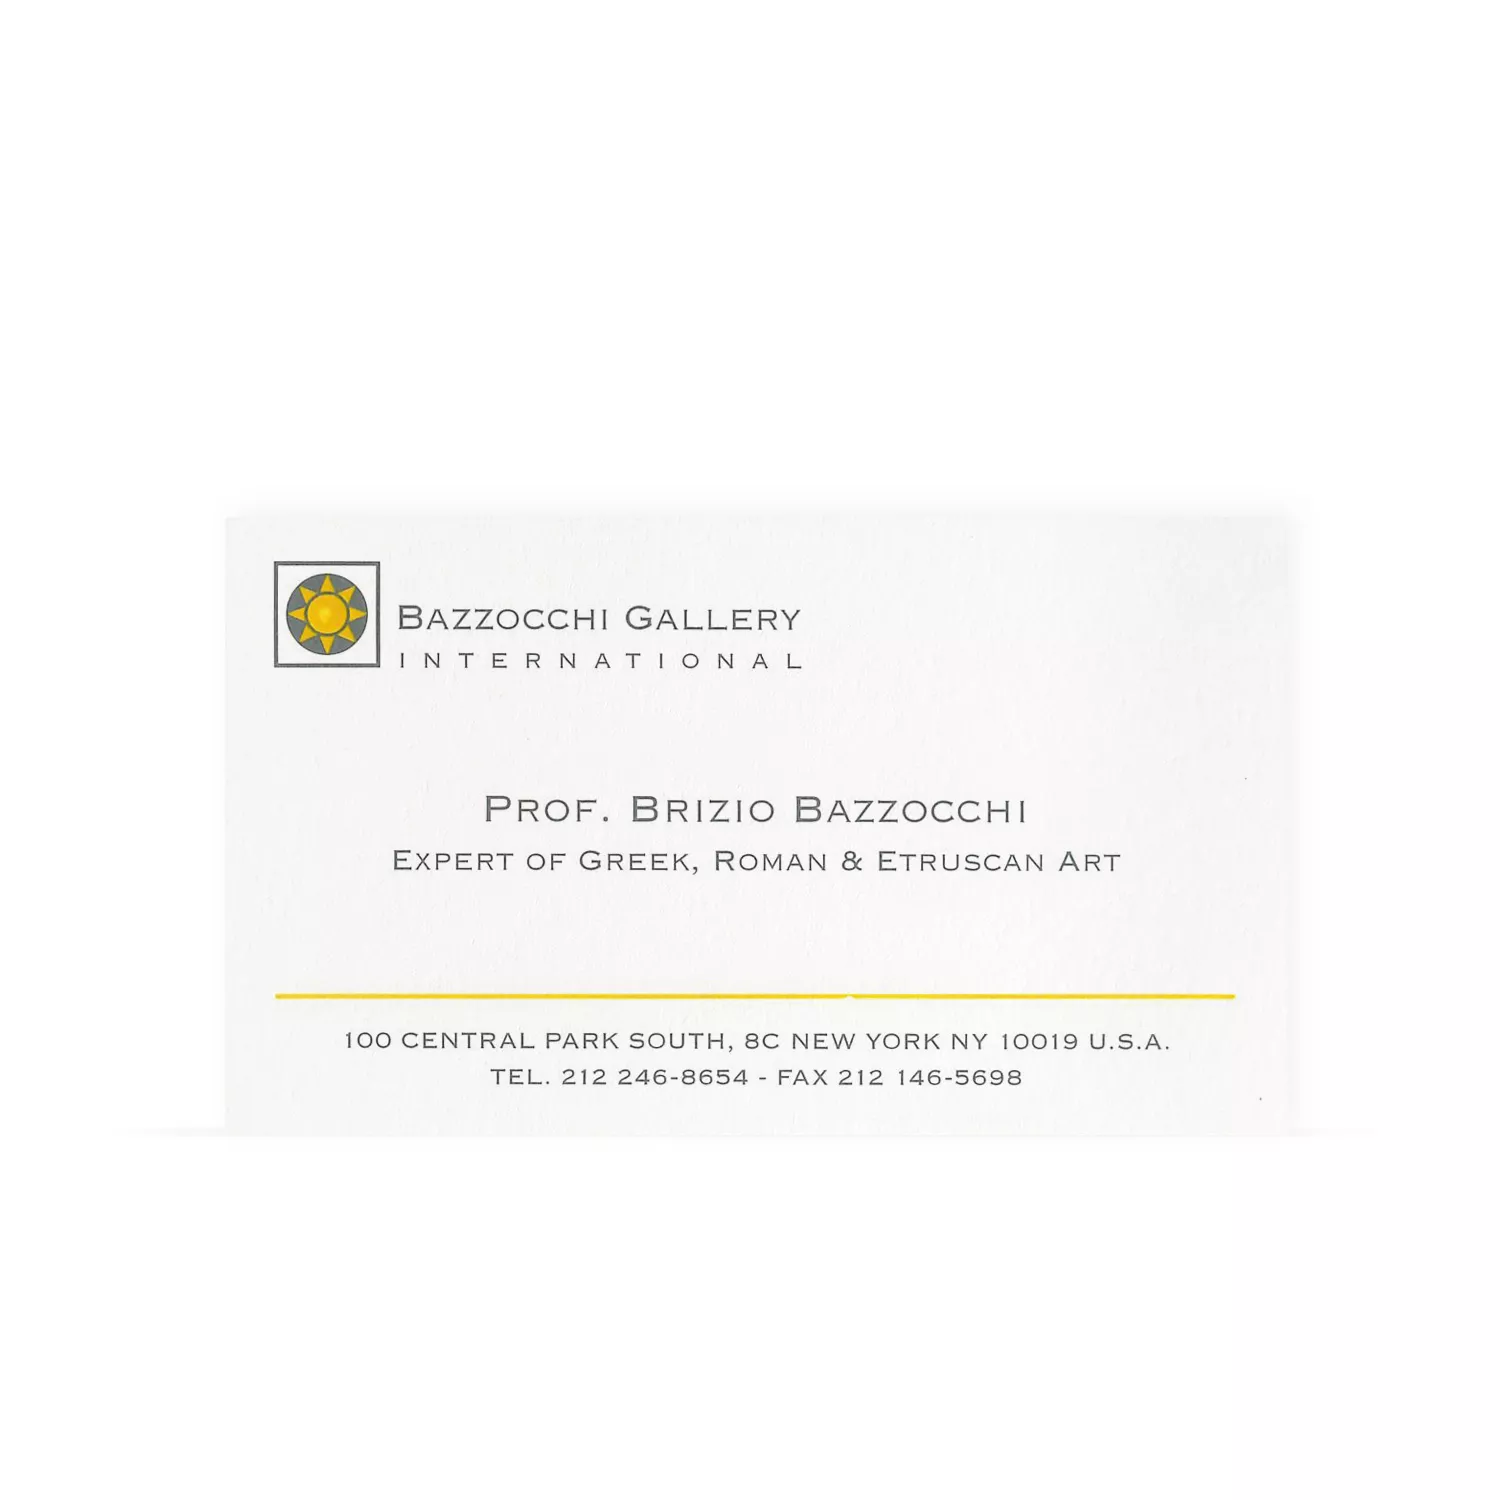 Boston Corporate Business Card with logo